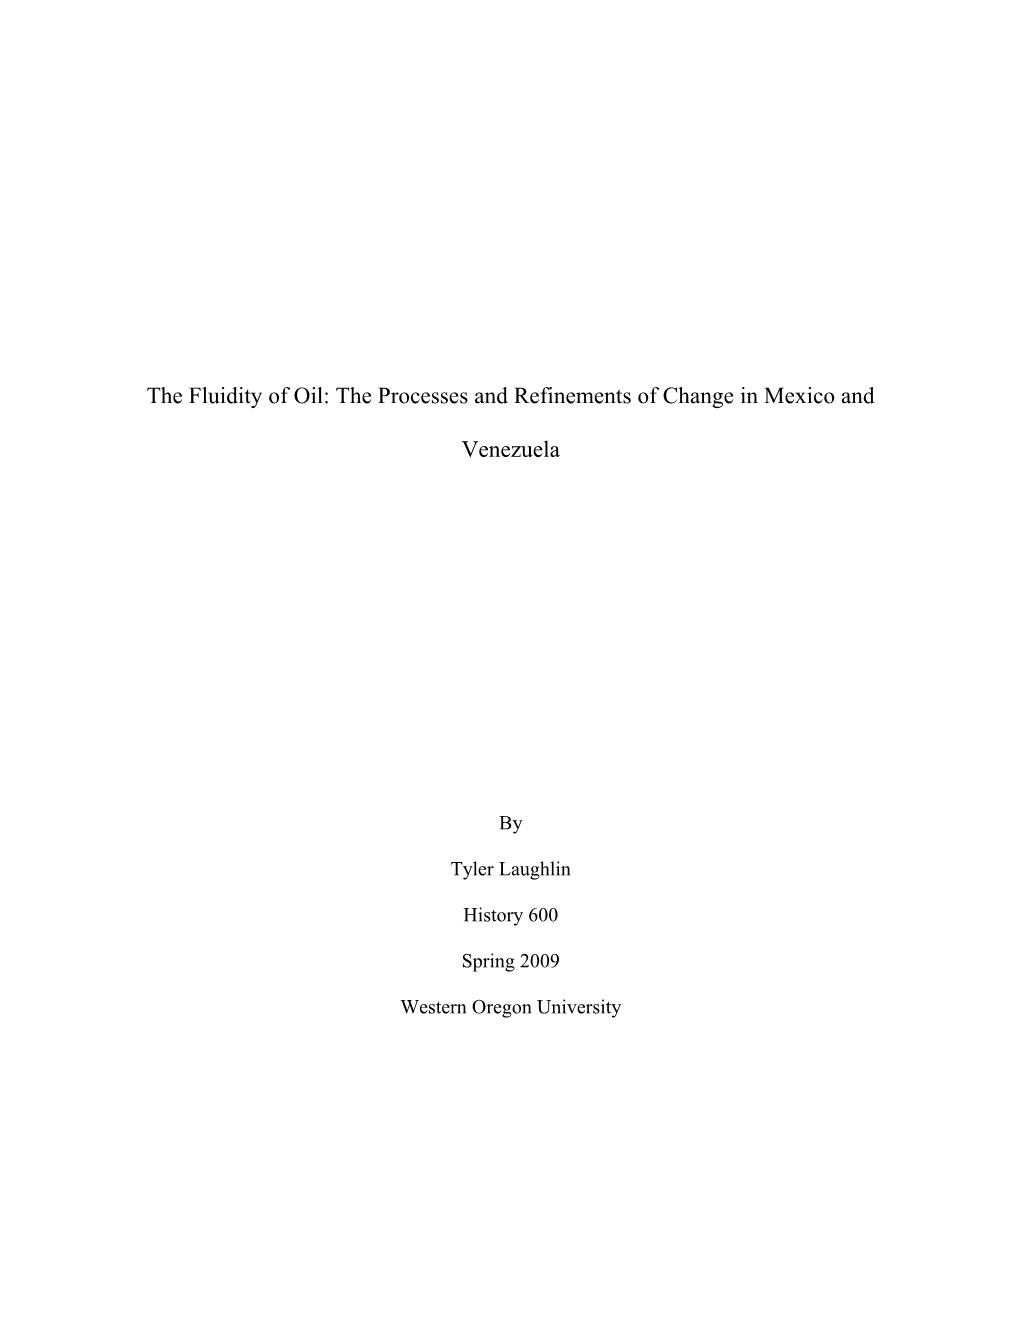 The Fluidity of Oil: the Processes and Refinements of Change in Mexico and Venezuela